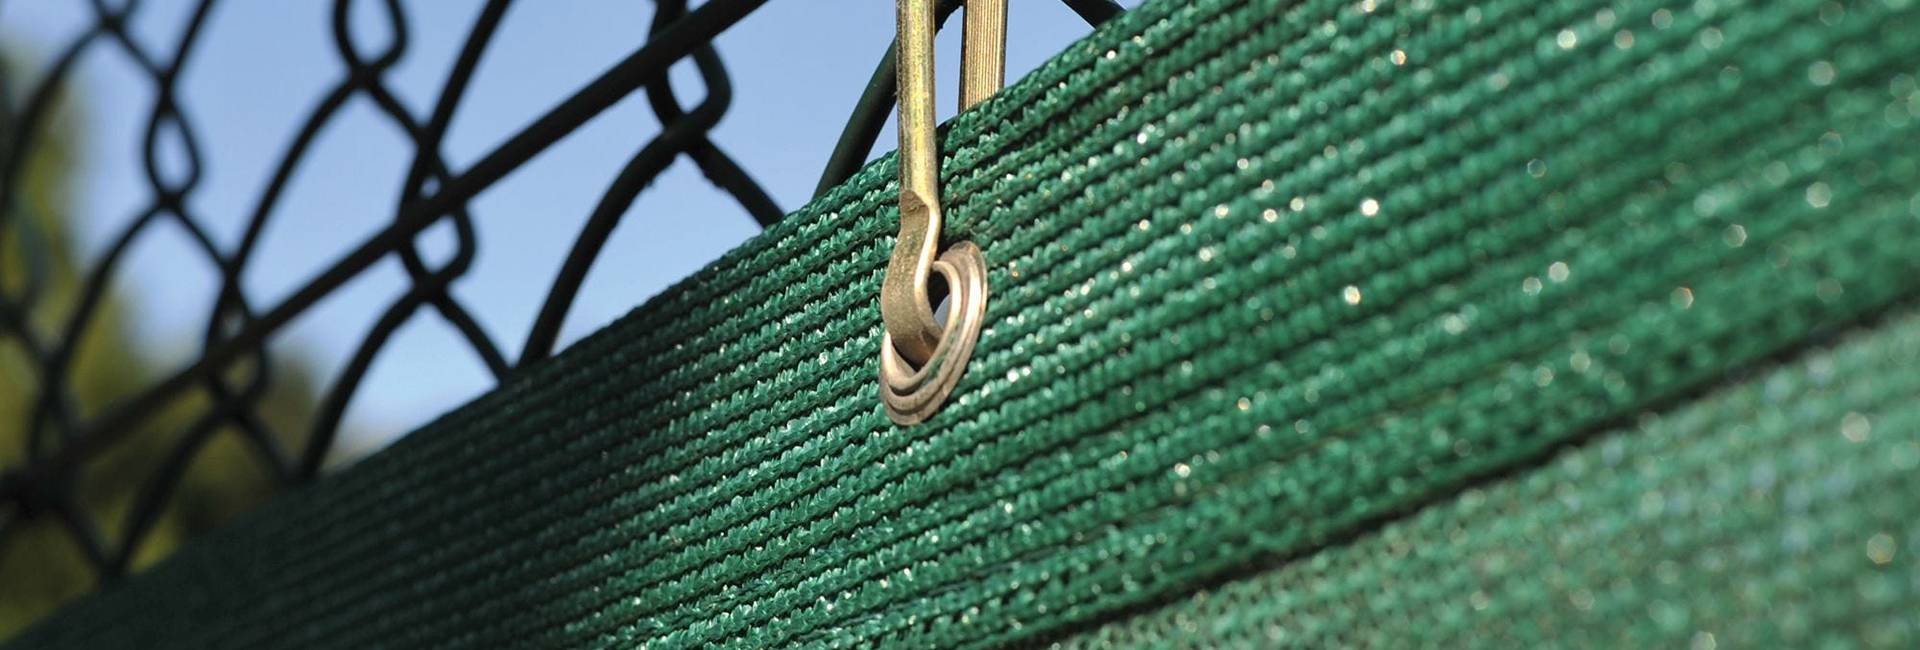 HDPE mono-filament knitted windbreak netting is hanging with metal hooks.